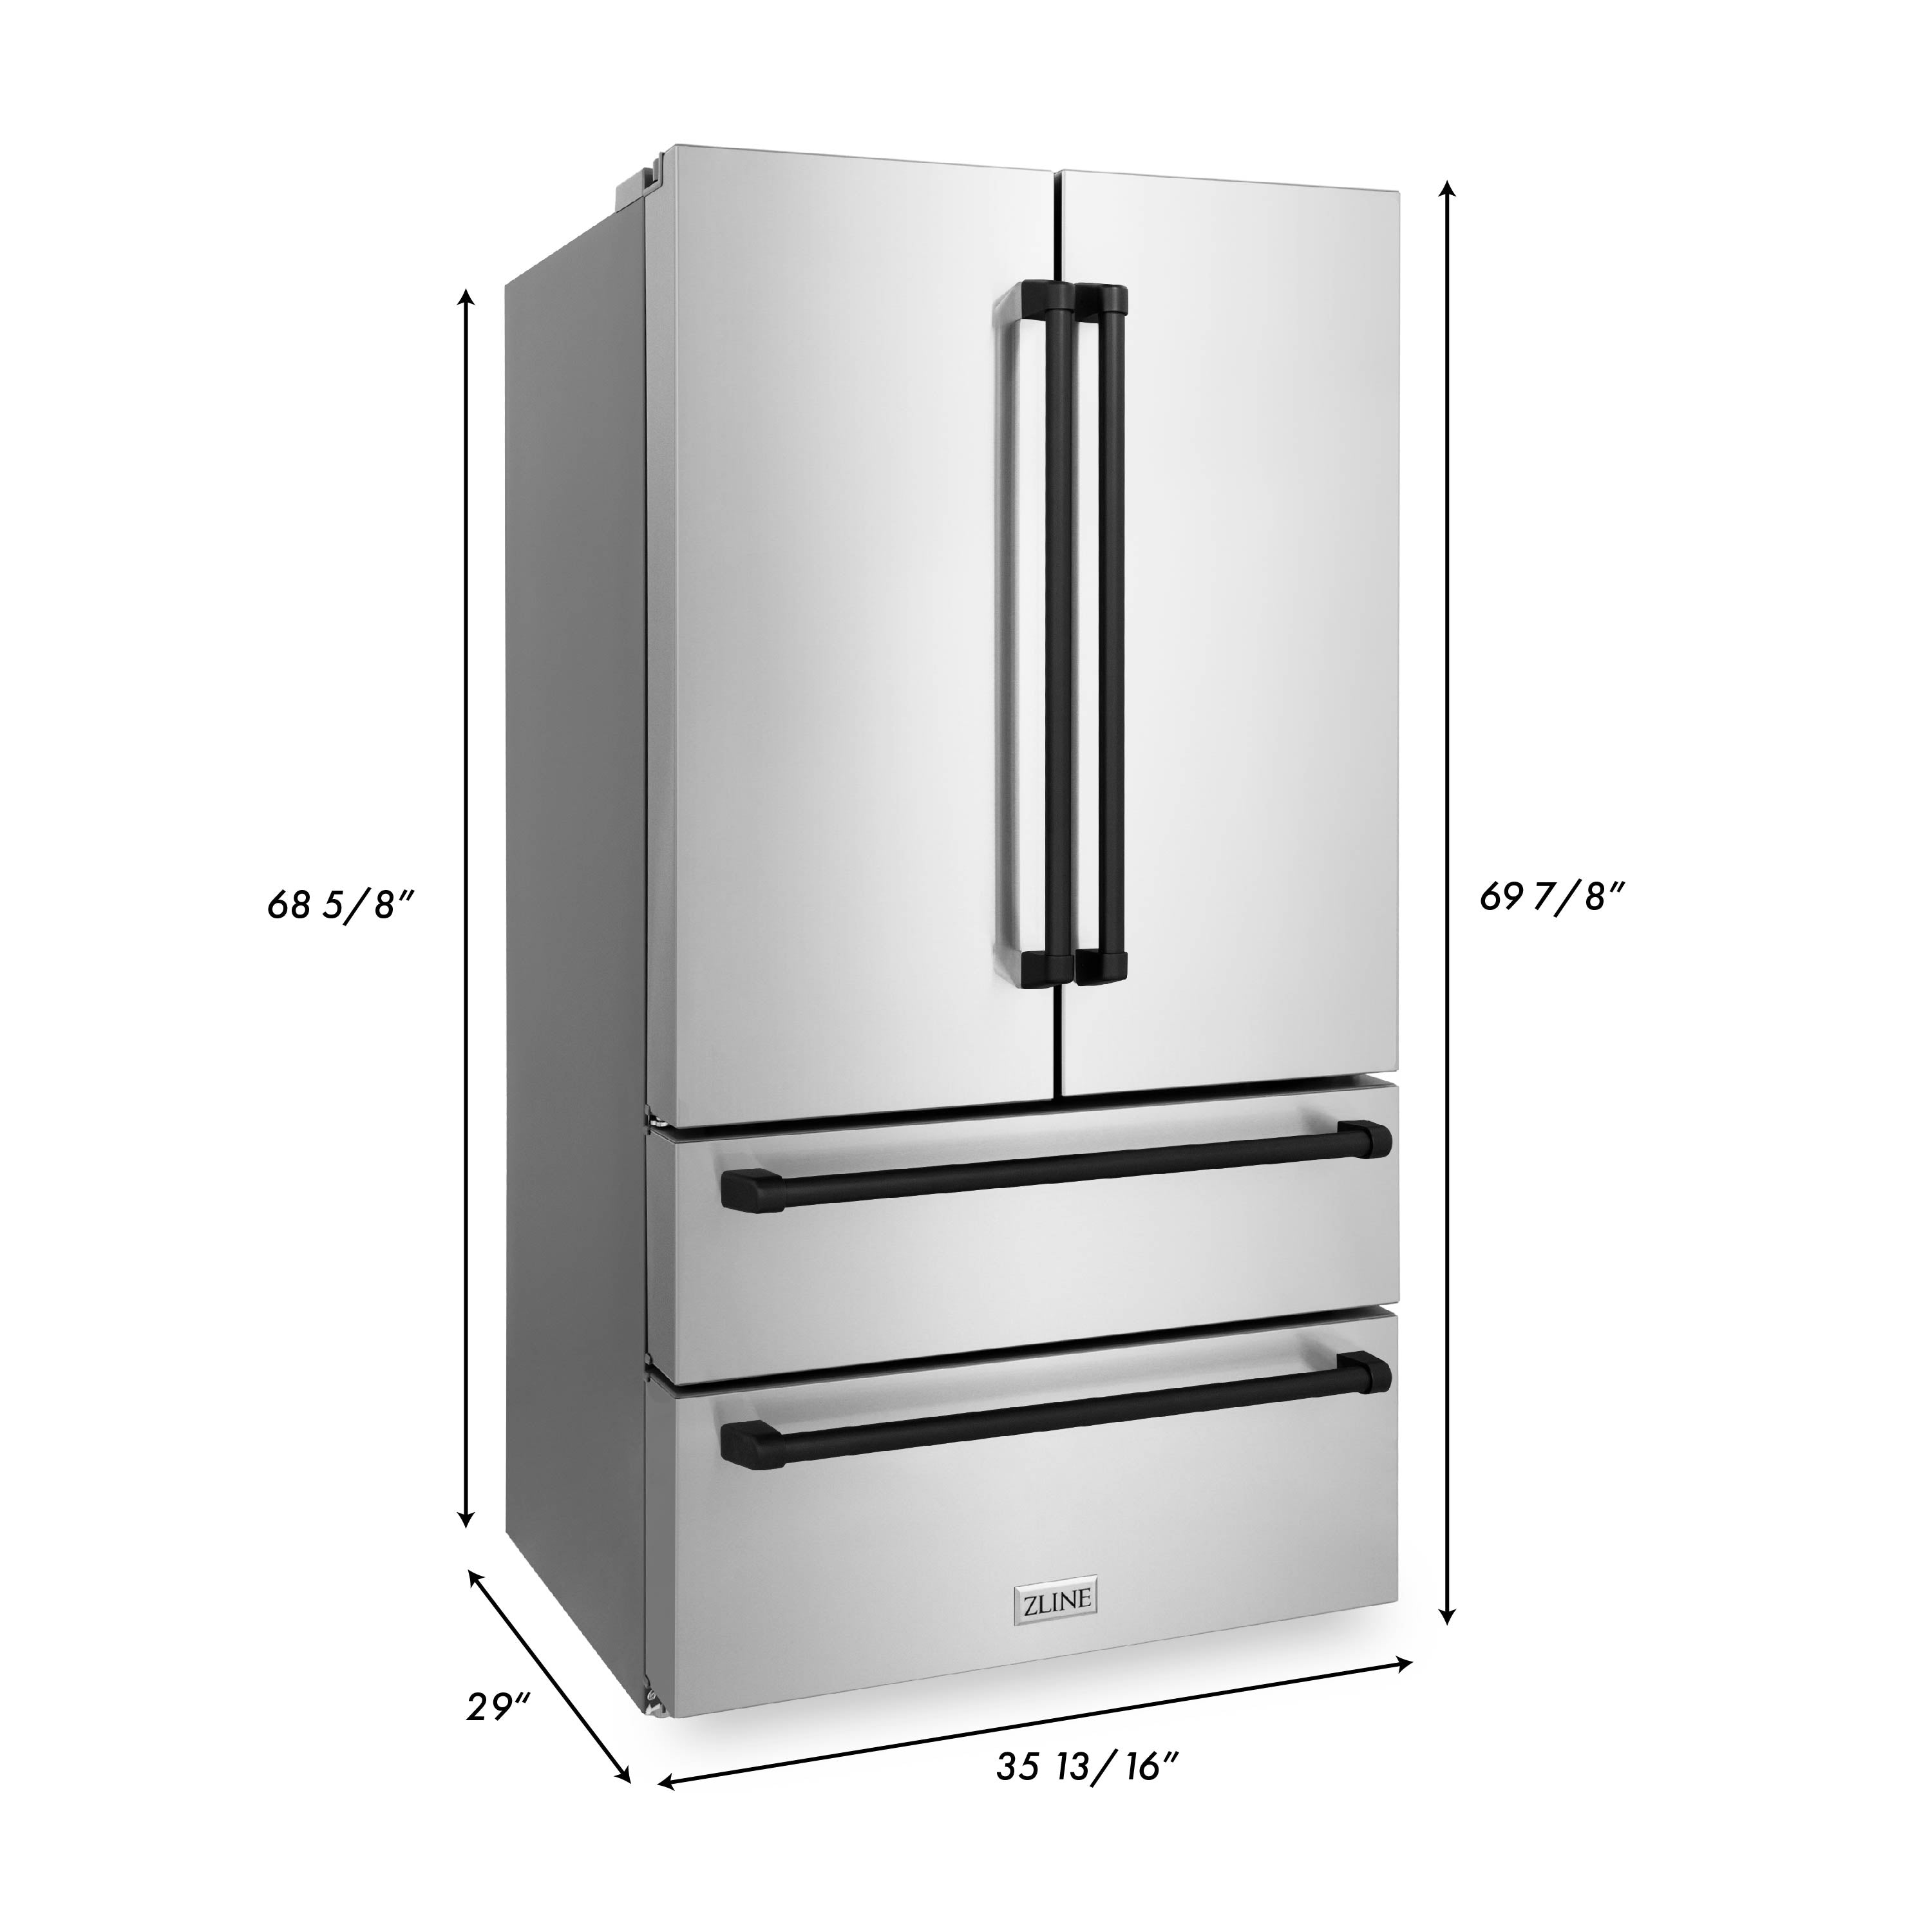 ZLINE Autograph Edition 48 in. Kitchen Package in Stainless Steel with Dual Fuel Range, Range Hood, Dishwasher and Refrigerator with Matte Black Accents (4KAPR-RARHDWM48-MB) dimensional diagram with measurements.